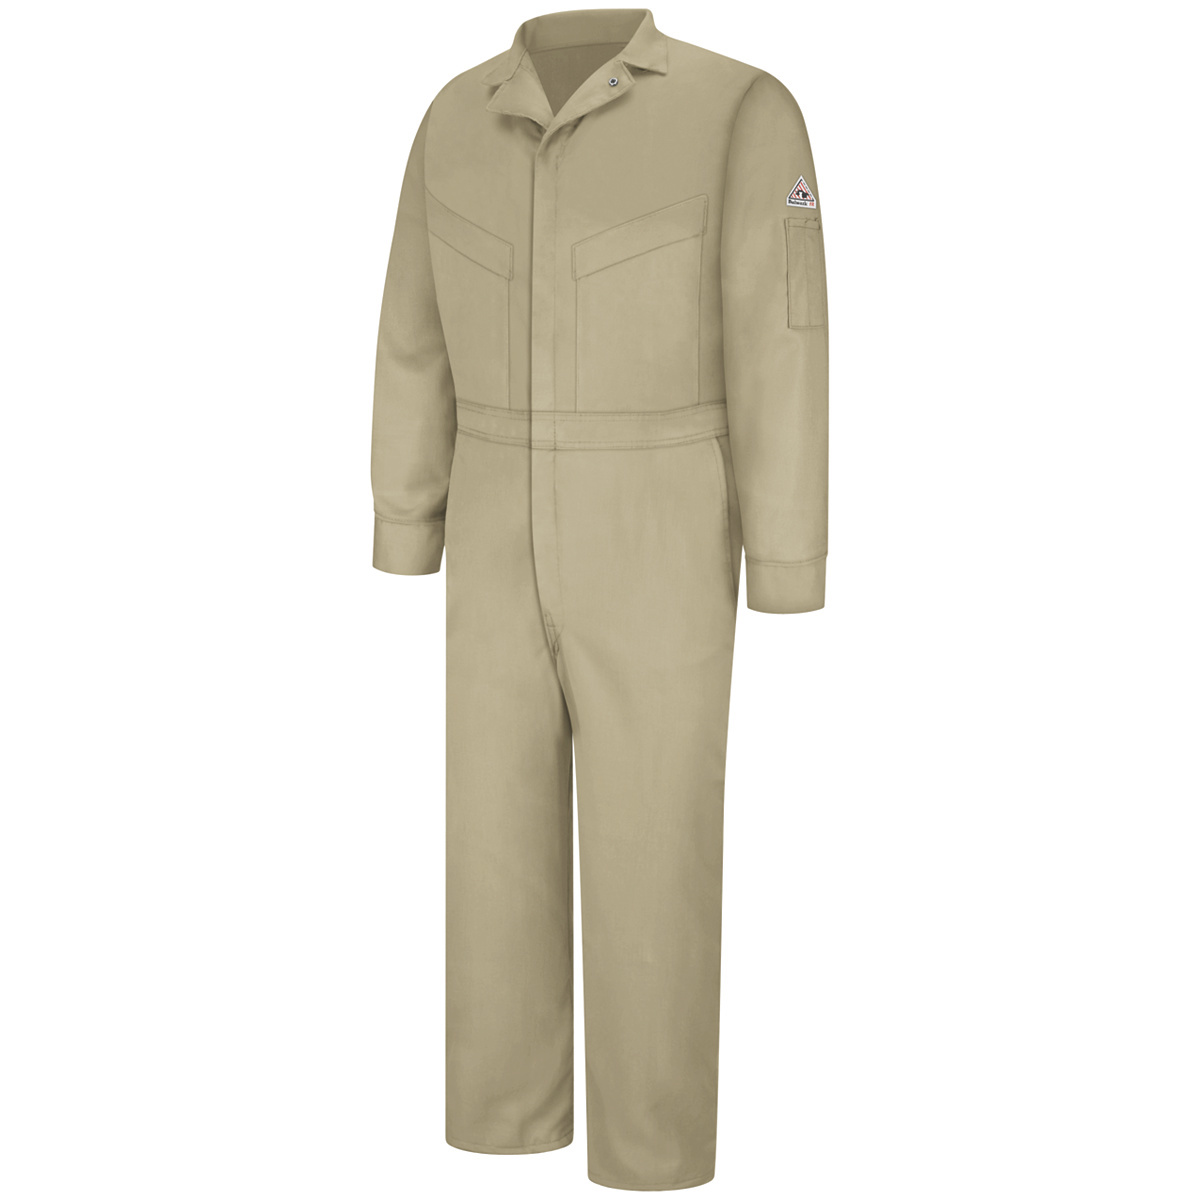 Bulwark® 44 Regular Khaki EXCEL FR® ComforTouch® Sateen/Cotton/Nylon Water Repellent Flame Resistant Coveralls With Zipper Front